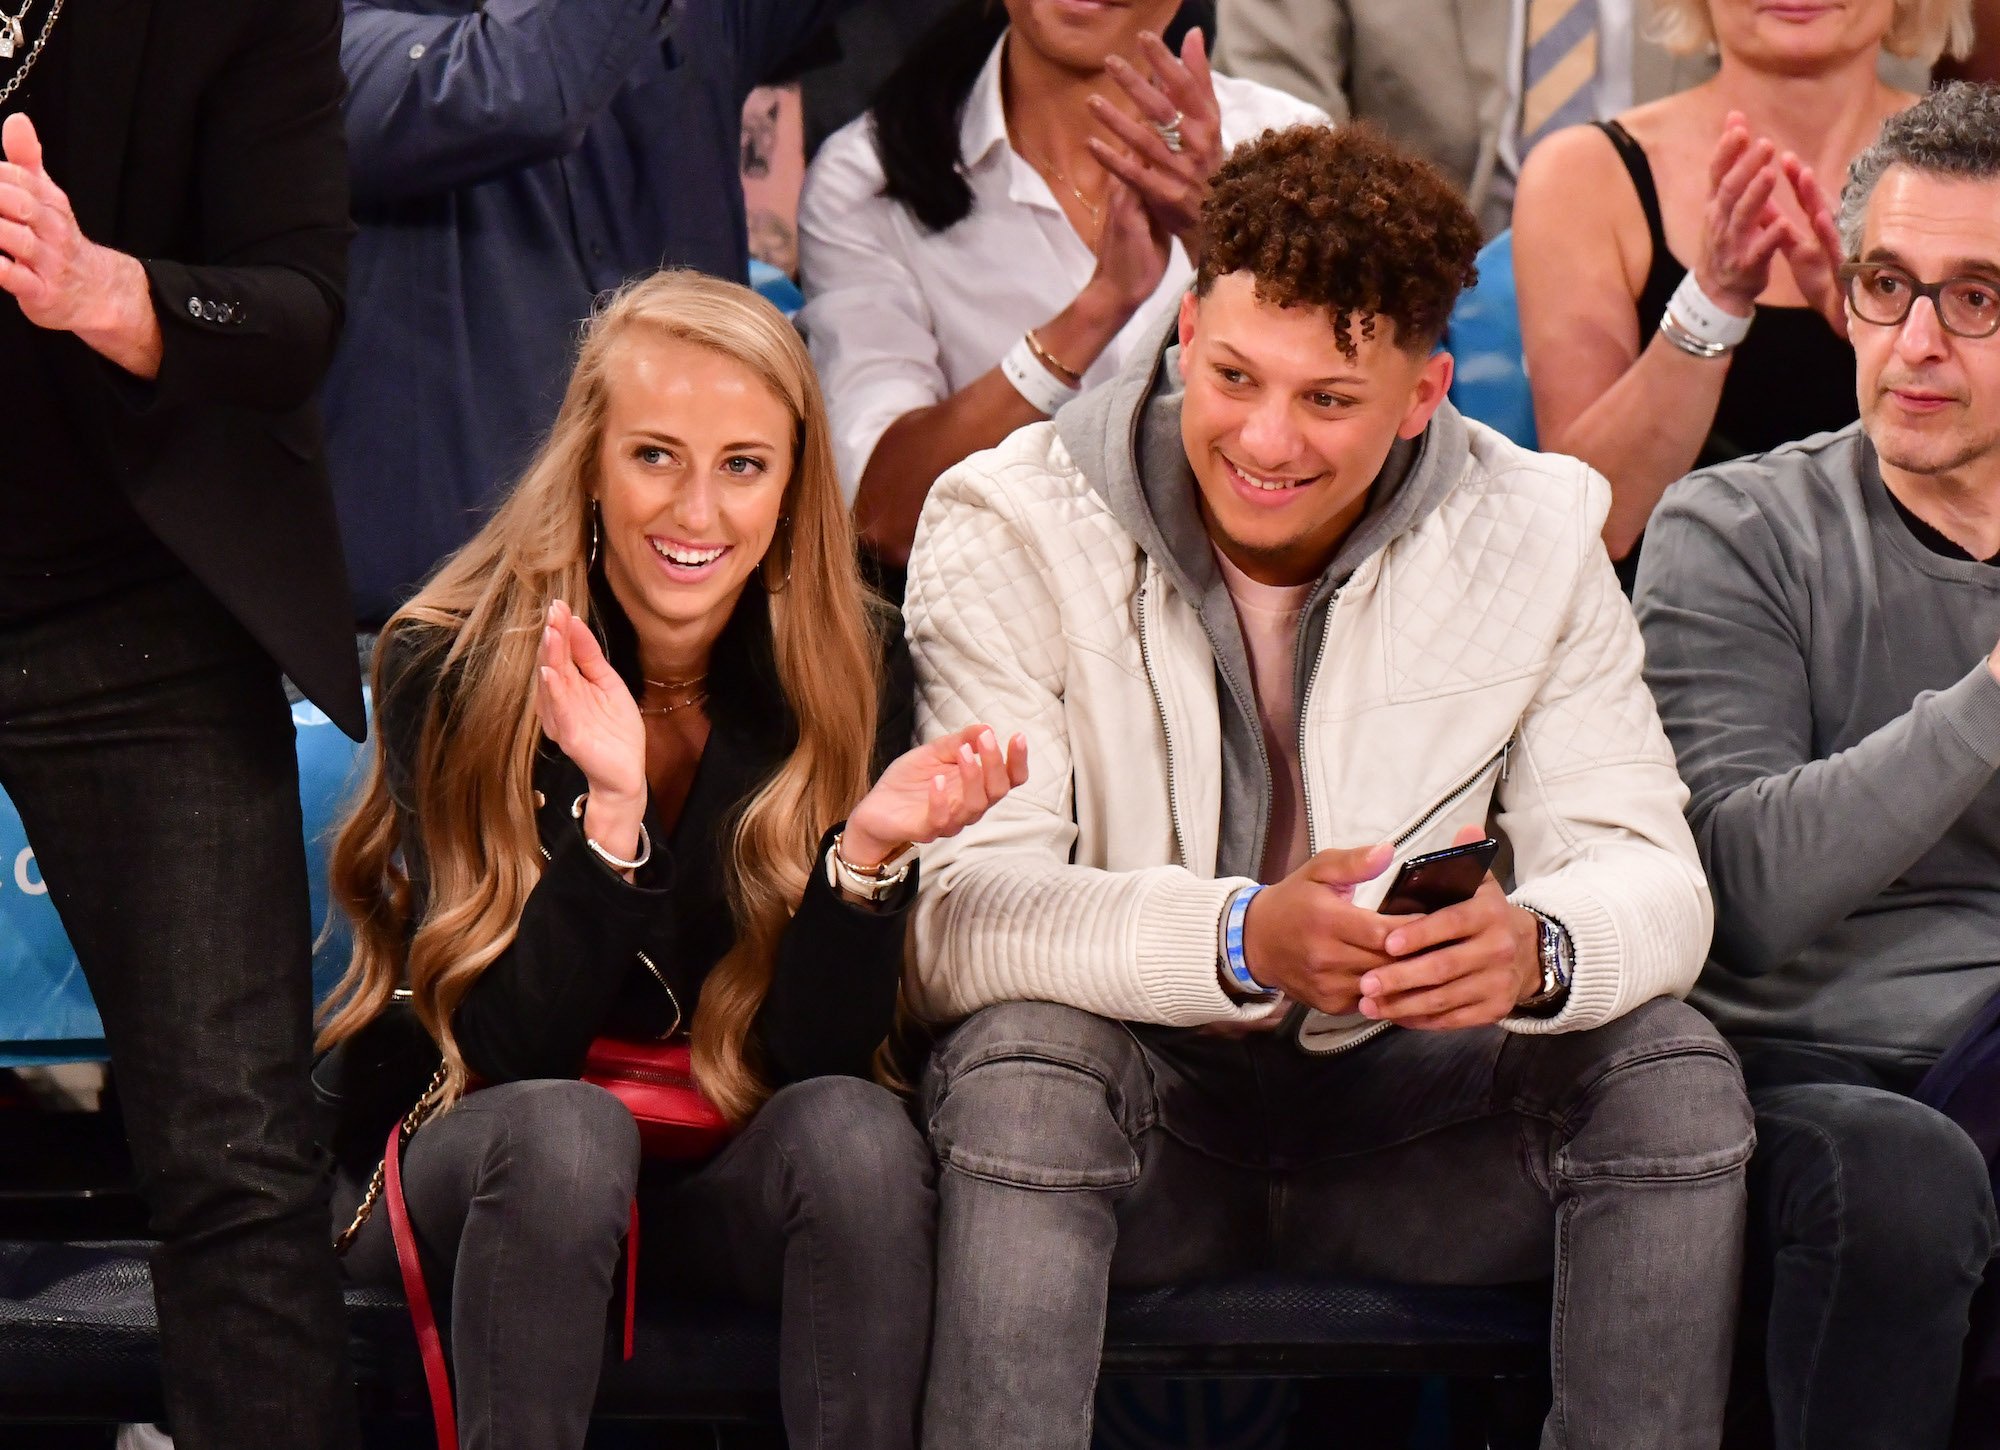 Patrick Mahomes and Brittany Matthews’ Adorable Cane Corso and Pit Bull Have Nearly 216K Instagram Followers